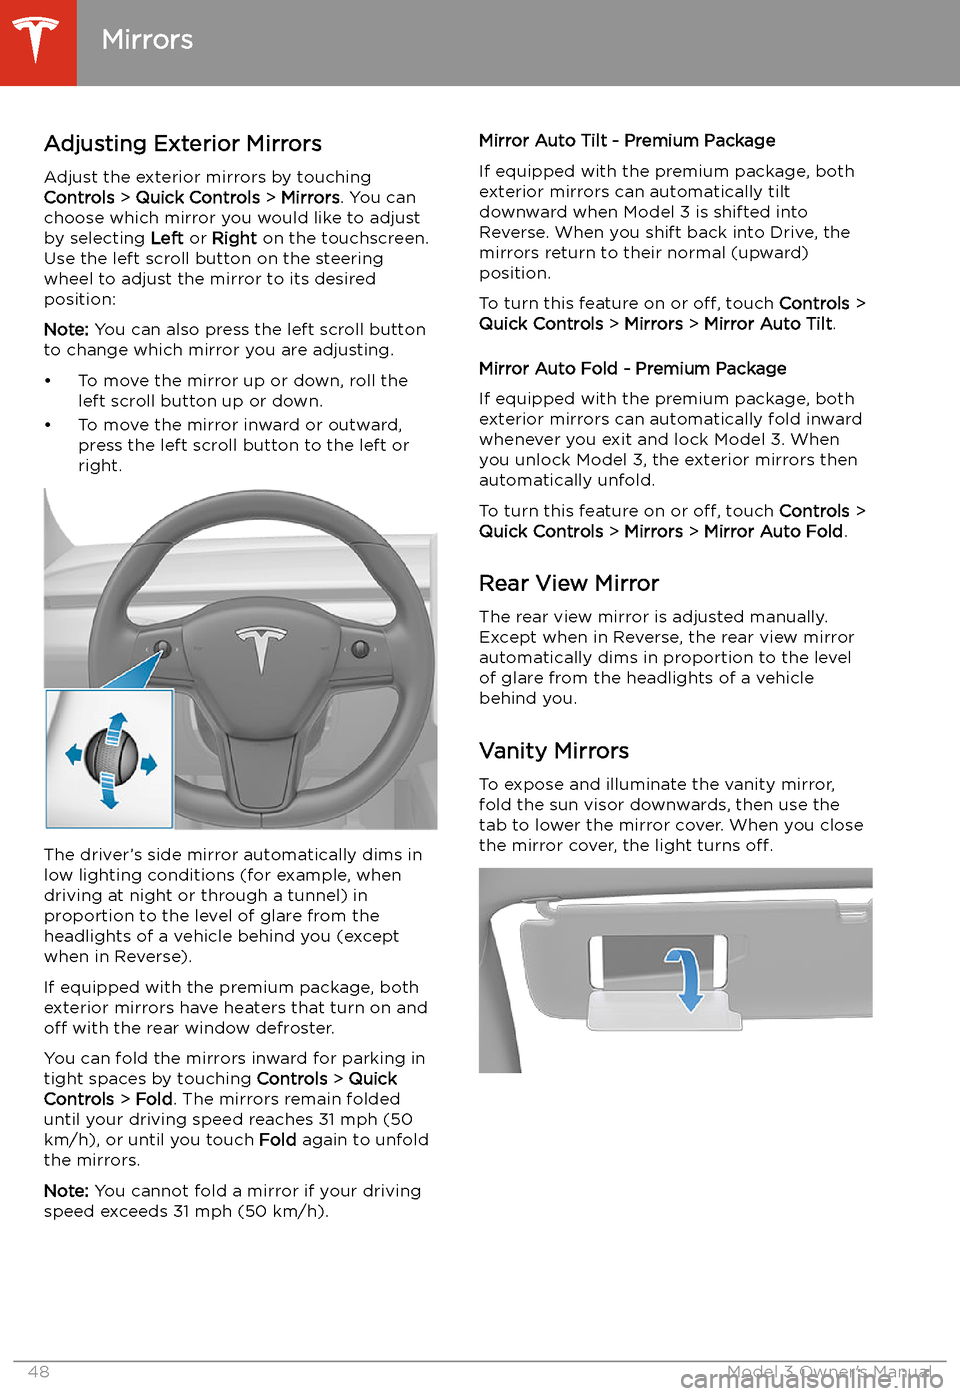 TESLA MODEL 3 2019  Owners Manual (Europe) Mirrors
Adjusting Exterior Mirrors Adjust the exterior mirrors by touching
Controls  > Quick Controls  > Mirrors . You can
choose which mirror you would like to adjust
by selecting  Left or Right  on 